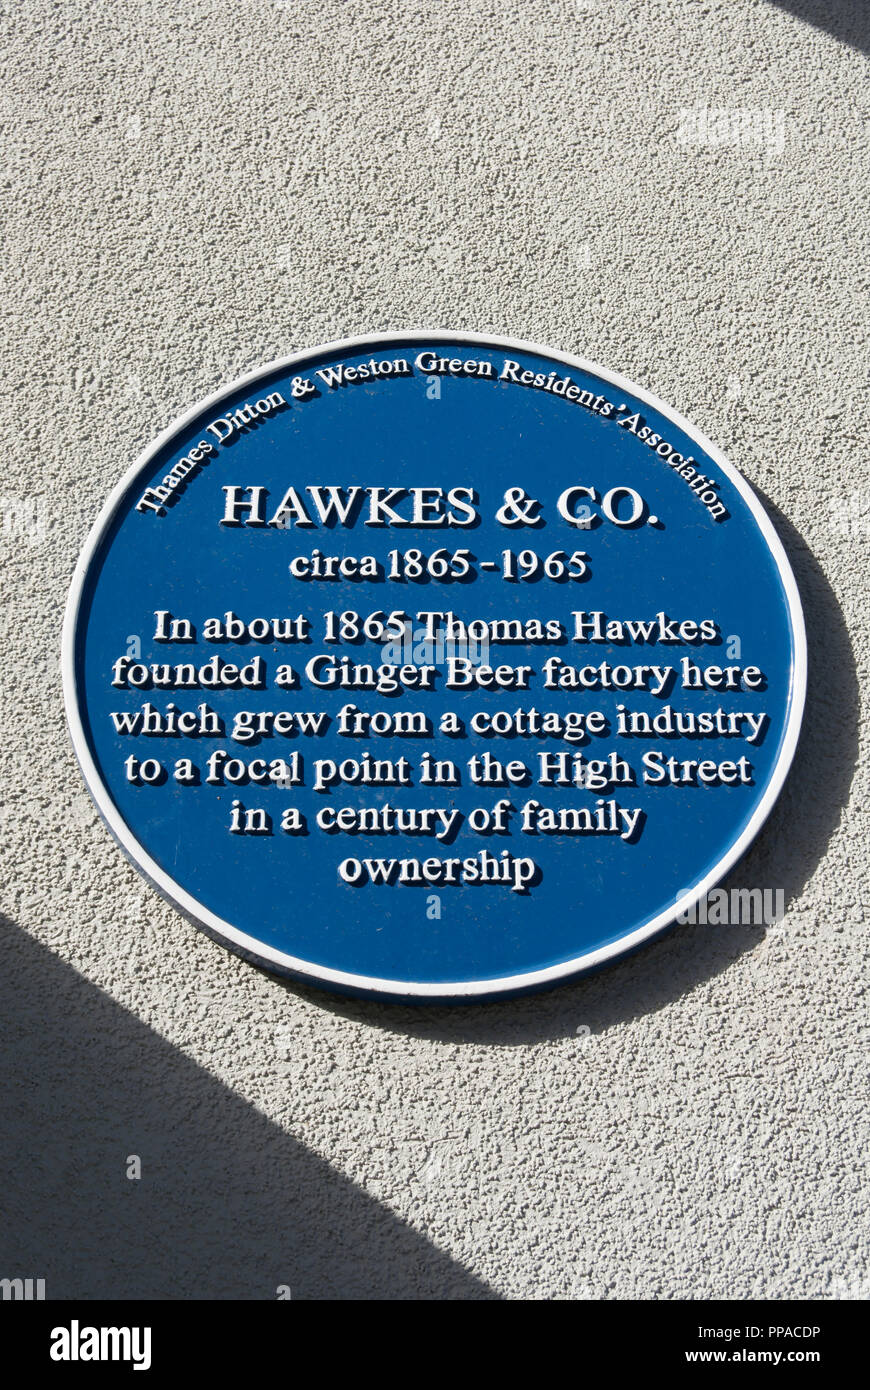 thames ditton and weston green residents association blue plaque marking the site of hawkes & co ginger beer factory, thames ditton, surrey, england Stock Photo